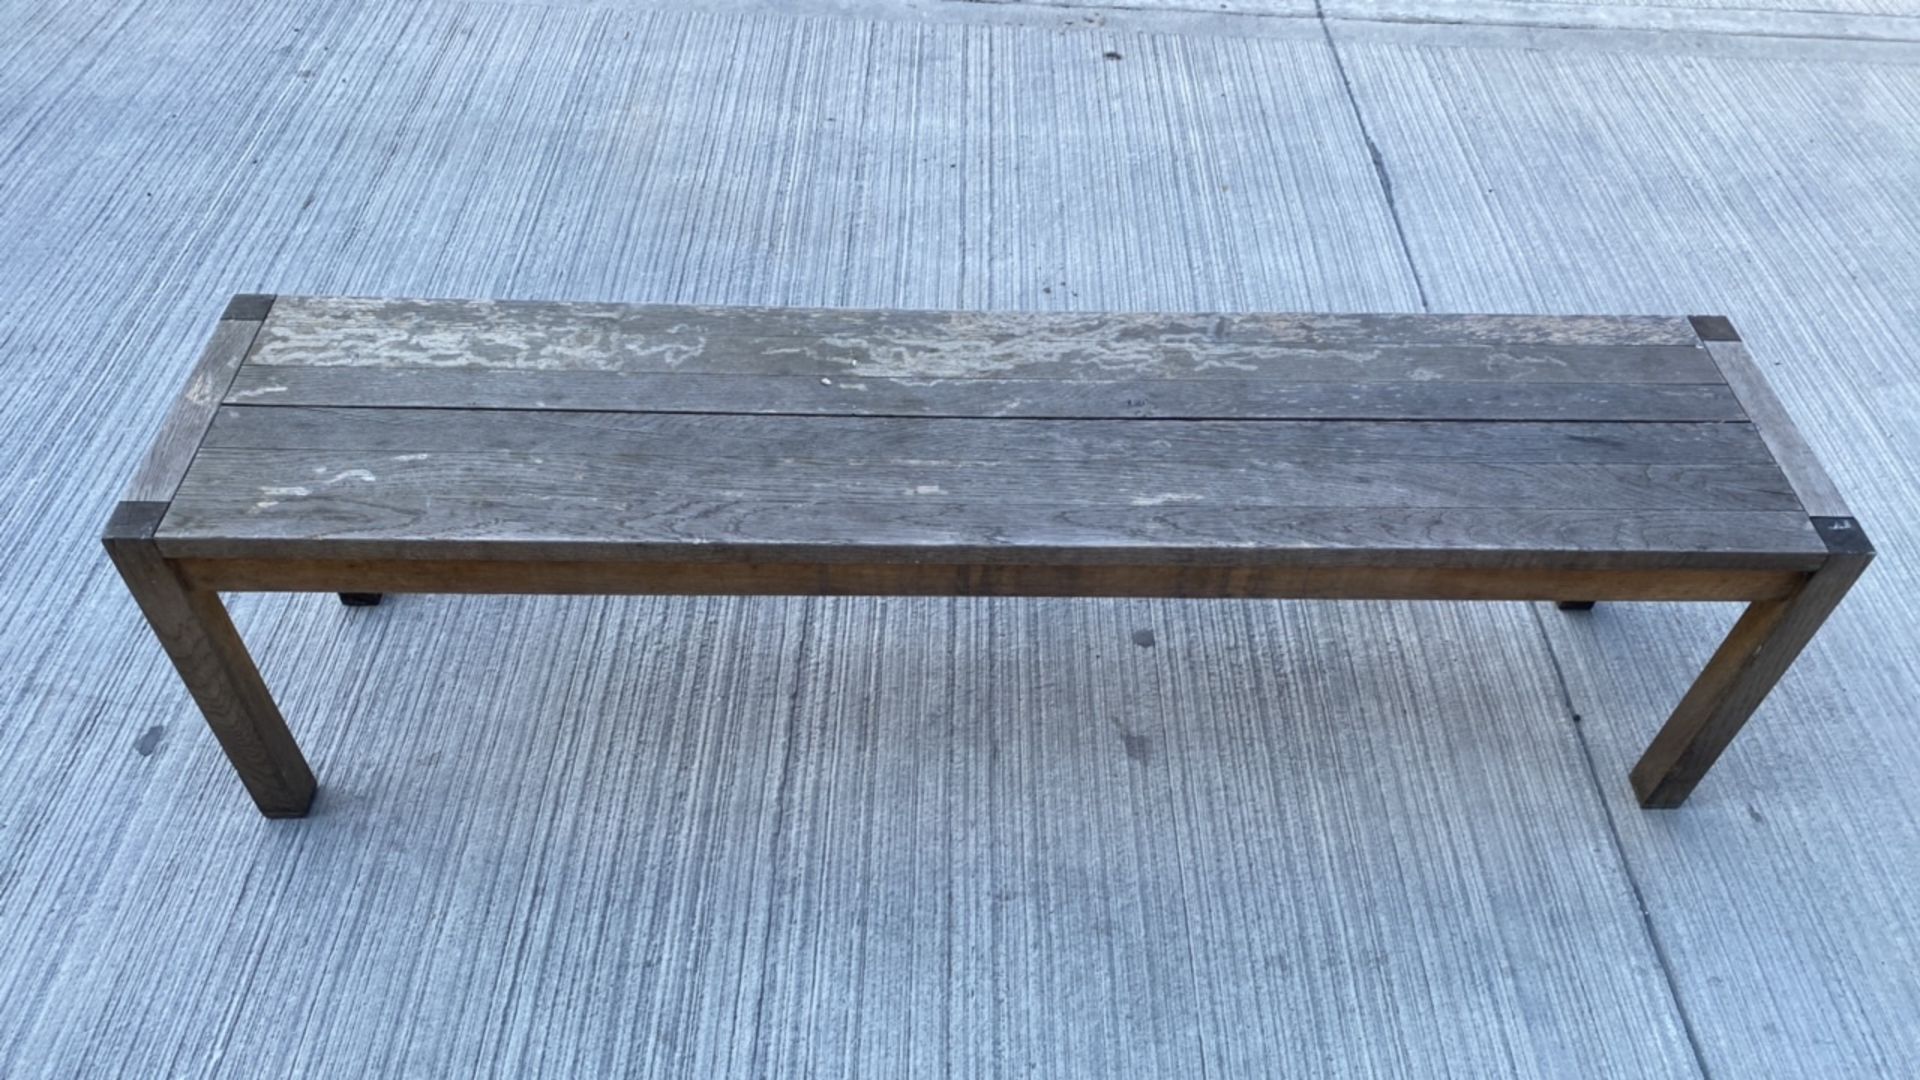 Wooden Bench - Image 2 of 3